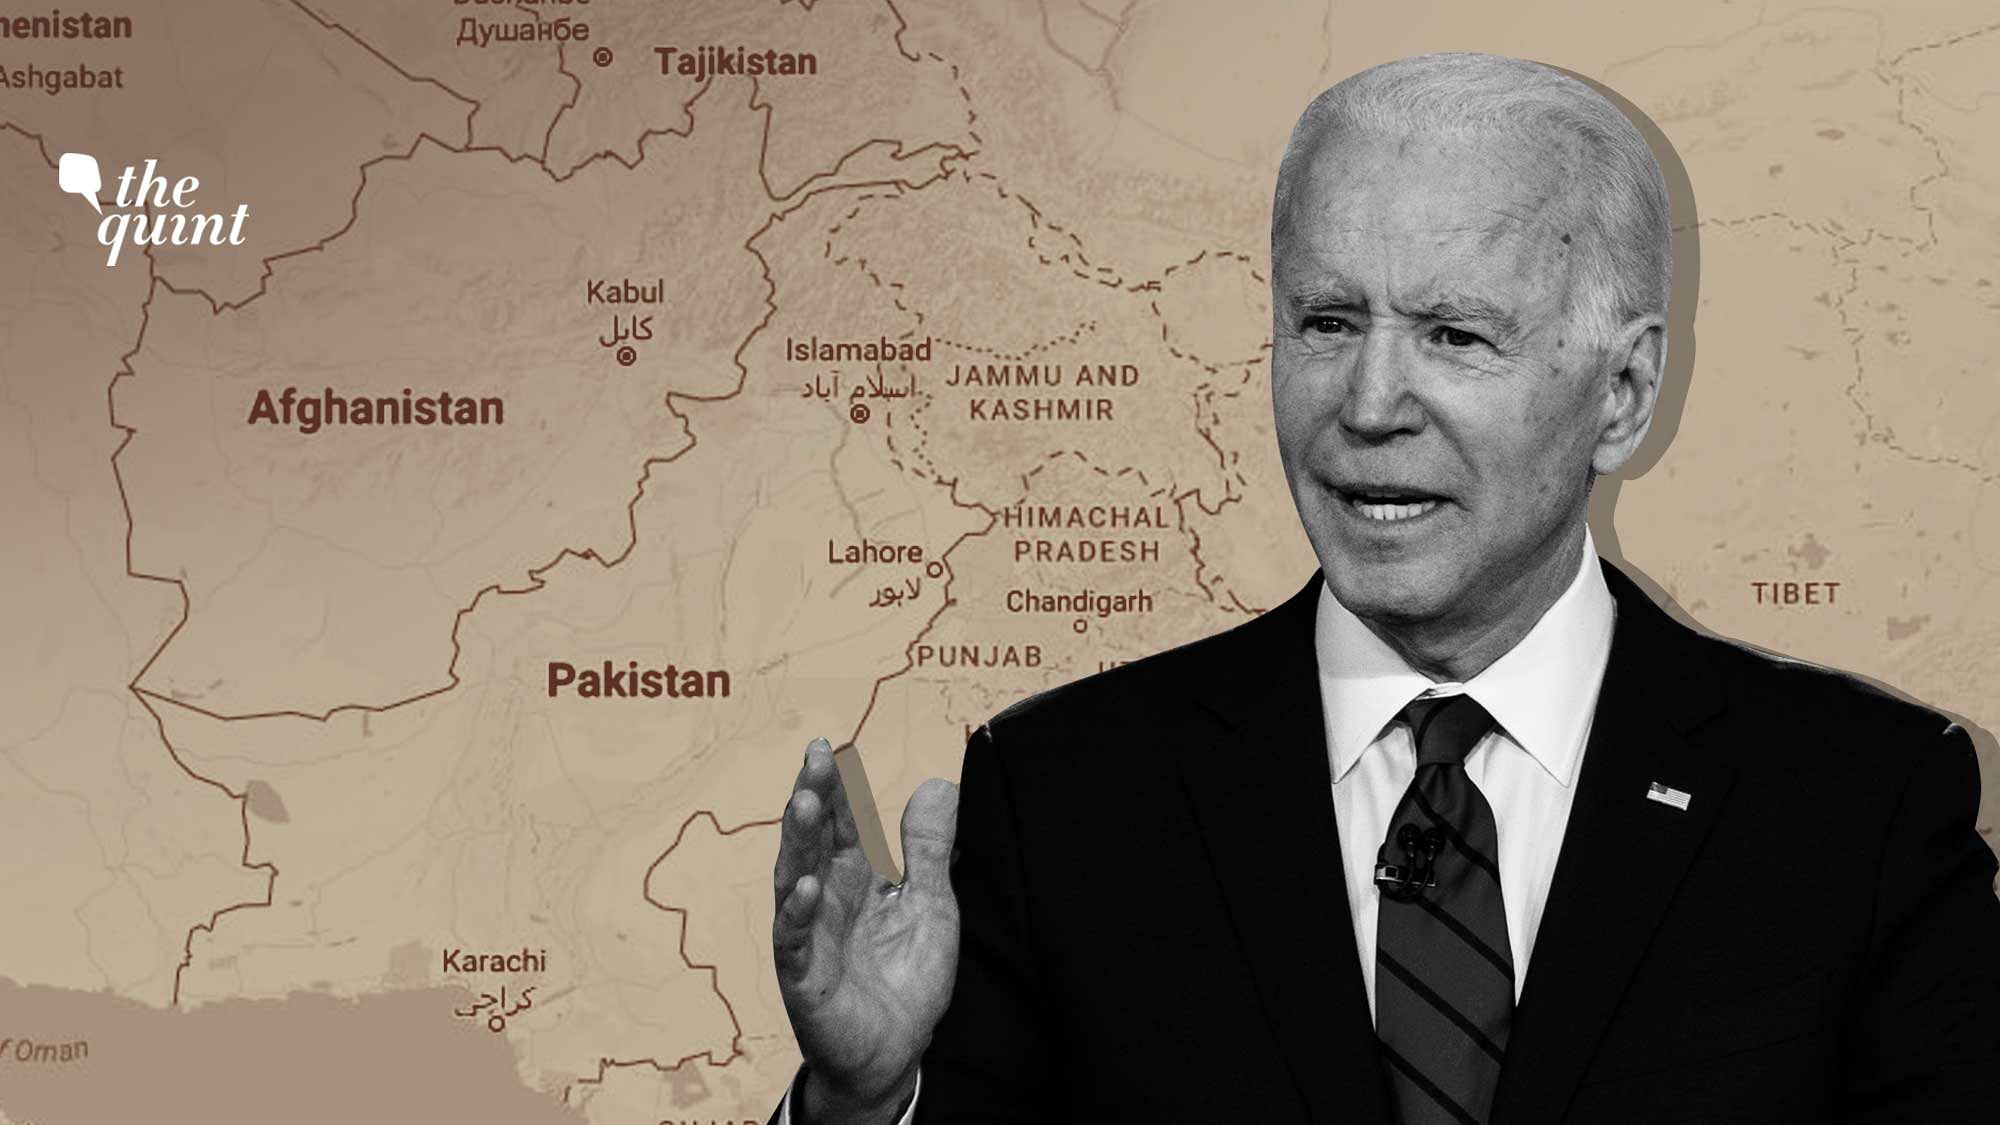 Image of Joe Biden and a map showing parts of South Asia, used for representational purposes.